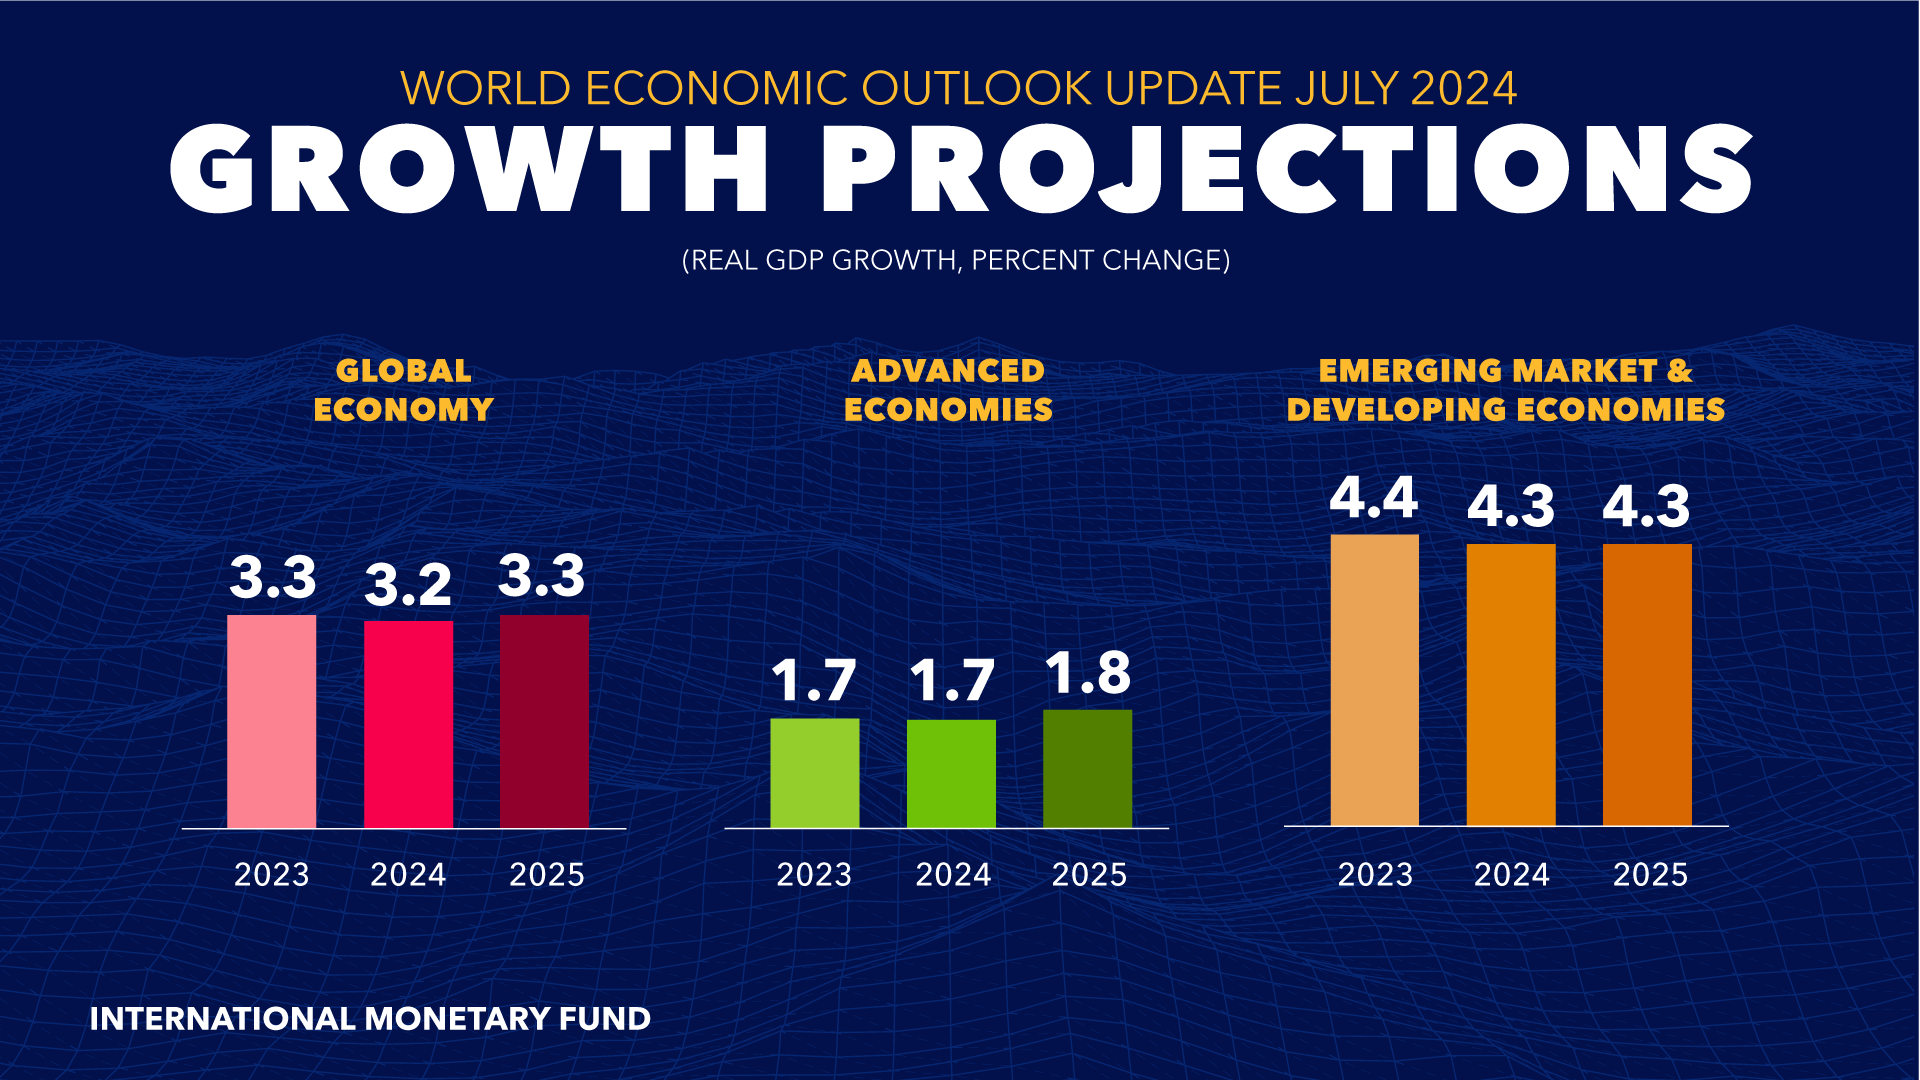 World Economic Outlook Update, July 2024: Growth Projections